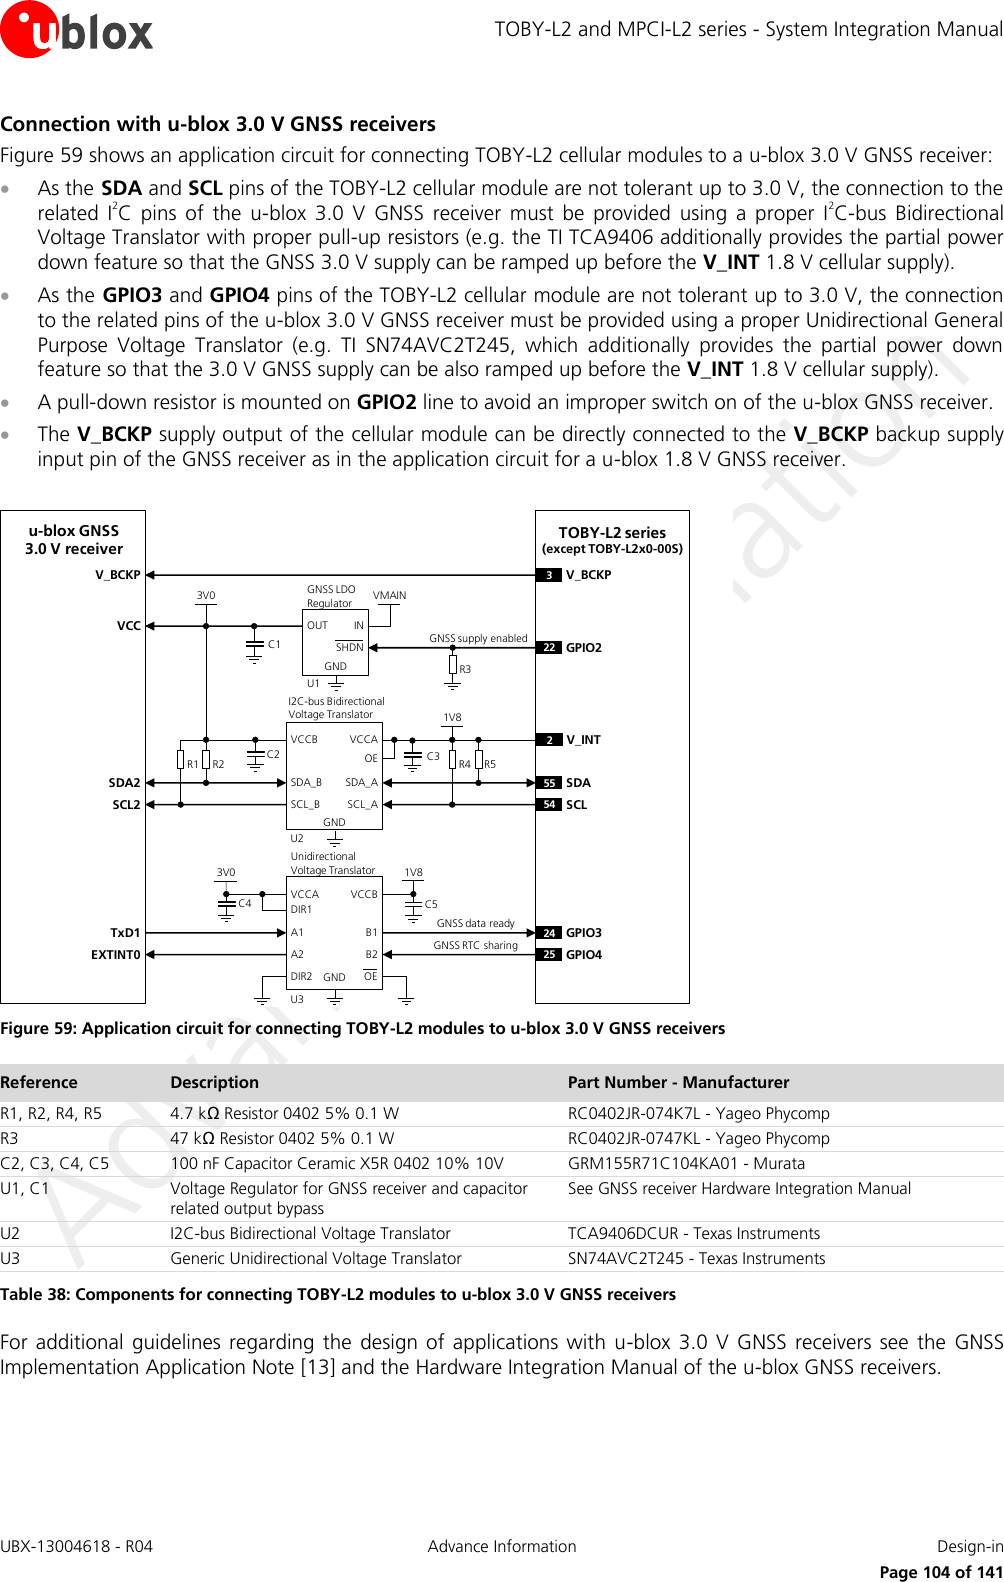 TOBY-L2 and MPCI-L2 series - System Integration Manual UBX-13004618 - R04  Advance Information  Design-in     Page 104 of 141 Connection with u-blox 3.0 V GNSS receivers Figure 59 shows an application circuit for connecting TOBY-L2 cellular modules to a u-blox 3.0 V GNSS receiver:  As the SDA and SCL pins of the TOBY-L2 cellular module are not tolerant up to 3.0 V, the connection to the related  I2C  pins  of  the  u-blox  3.0  V  GNSS  receiver  must  be  provided  using  a  proper  I2C-bus  Bidirectional Voltage Translator with proper pull-up resistors (e.g. the TI TCA9406 additionally provides the partial power down feature so that the GNSS 3.0 V supply can be ramped up before the V_INT 1.8 V cellular supply).  As the GPIO3 and GPIO4 pins of the TOBY-L2 cellular module are not tolerant up to 3.0 V, the connection to the related pins of the u-blox 3.0 V GNSS receiver must be provided using a proper Unidirectional General Purpose  Voltage  Translator  (e.g.  TI  SN74AVC2T245,  which  additionally  provides  the  partial  power  down feature so that the 3.0 V GNSS supply can be also ramped up before the V_INT 1.8 V cellular supply).  A pull-down resistor is mounted on GPIO2 line to avoid an improper switch on of the u-blox GNSS receiver.  The V_BCKP supply output of the cellular module can be directly connected to the V_BCKP backup supply input pin of the GNSS receiver as in the application circuit for a u-blox 1.8 V GNSS receiver.  TOBY-L2 series  (except TOBY-L2x0-00S)u-blox GNSS 3.0 V receiver24 GPIO325 GPIO41V8B1 A1GNDU3B2A2VCCBVCCAUnidirectionalVoltage TranslatorC4 C53V0TxD1EXTINT0R1INOUTGNDGNSS LDORegulatorSHDNR2VMAIN3V0U122 GPIO255 SDA54 SCLR4 R51V8SDA_A SDA_BGNDU2SCL_ASCL_BVCCAVCCBI2C-bus Bidirectional Voltage Translator2V_INTC1C2 C3R3SDA2SCL2VCCDIR1DIR23V_BCKPV_BCKPOEOEGNSS data readyGNSS RTC sharingGNSS supply enabled Figure 59: Application circuit for connecting TOBY-L2 modules to u-blox 3.0 V GNSS receivers Reference Description Part Number - Manufacturer R1, R2, R4, R5 4.7 kΩ Resistor 0402 5% 0.1 W  RC0402JR-074K7L - Yageo Phycomp R3 47 kΩ Resistor 0402 5% 0.1 W  RC0402JR-0747KL - Yageo Phycomp C2, C3, C4, C5 100 nF Capacitor Ceramic X5R 0402 10% 10V GRM155R71C104KA01 - Murata U1, C1 Voltage Regulator for GNSS receiver and capacitor related output bypass  See GNSS receiver Hardware Integration Manual U2 I2C-bus Bidirectional Voltage Translator TCA9406DCUR - Texas Instruments U3 Generic Unidirectional Voltage Translator SN74AVC2T245 - Texas Instruments Table 38: Components for connecting TOBY-L2 modules to u-blox 3.0 V GNSS receivers For additional  guidelines regarding  the  design of applications with  u-blox  3.0  V  GNSS  receivers  see  the  GNSS Implementation Application Note [13] and the Hardware Integration Manual of the u-blox GNSS receivers.  